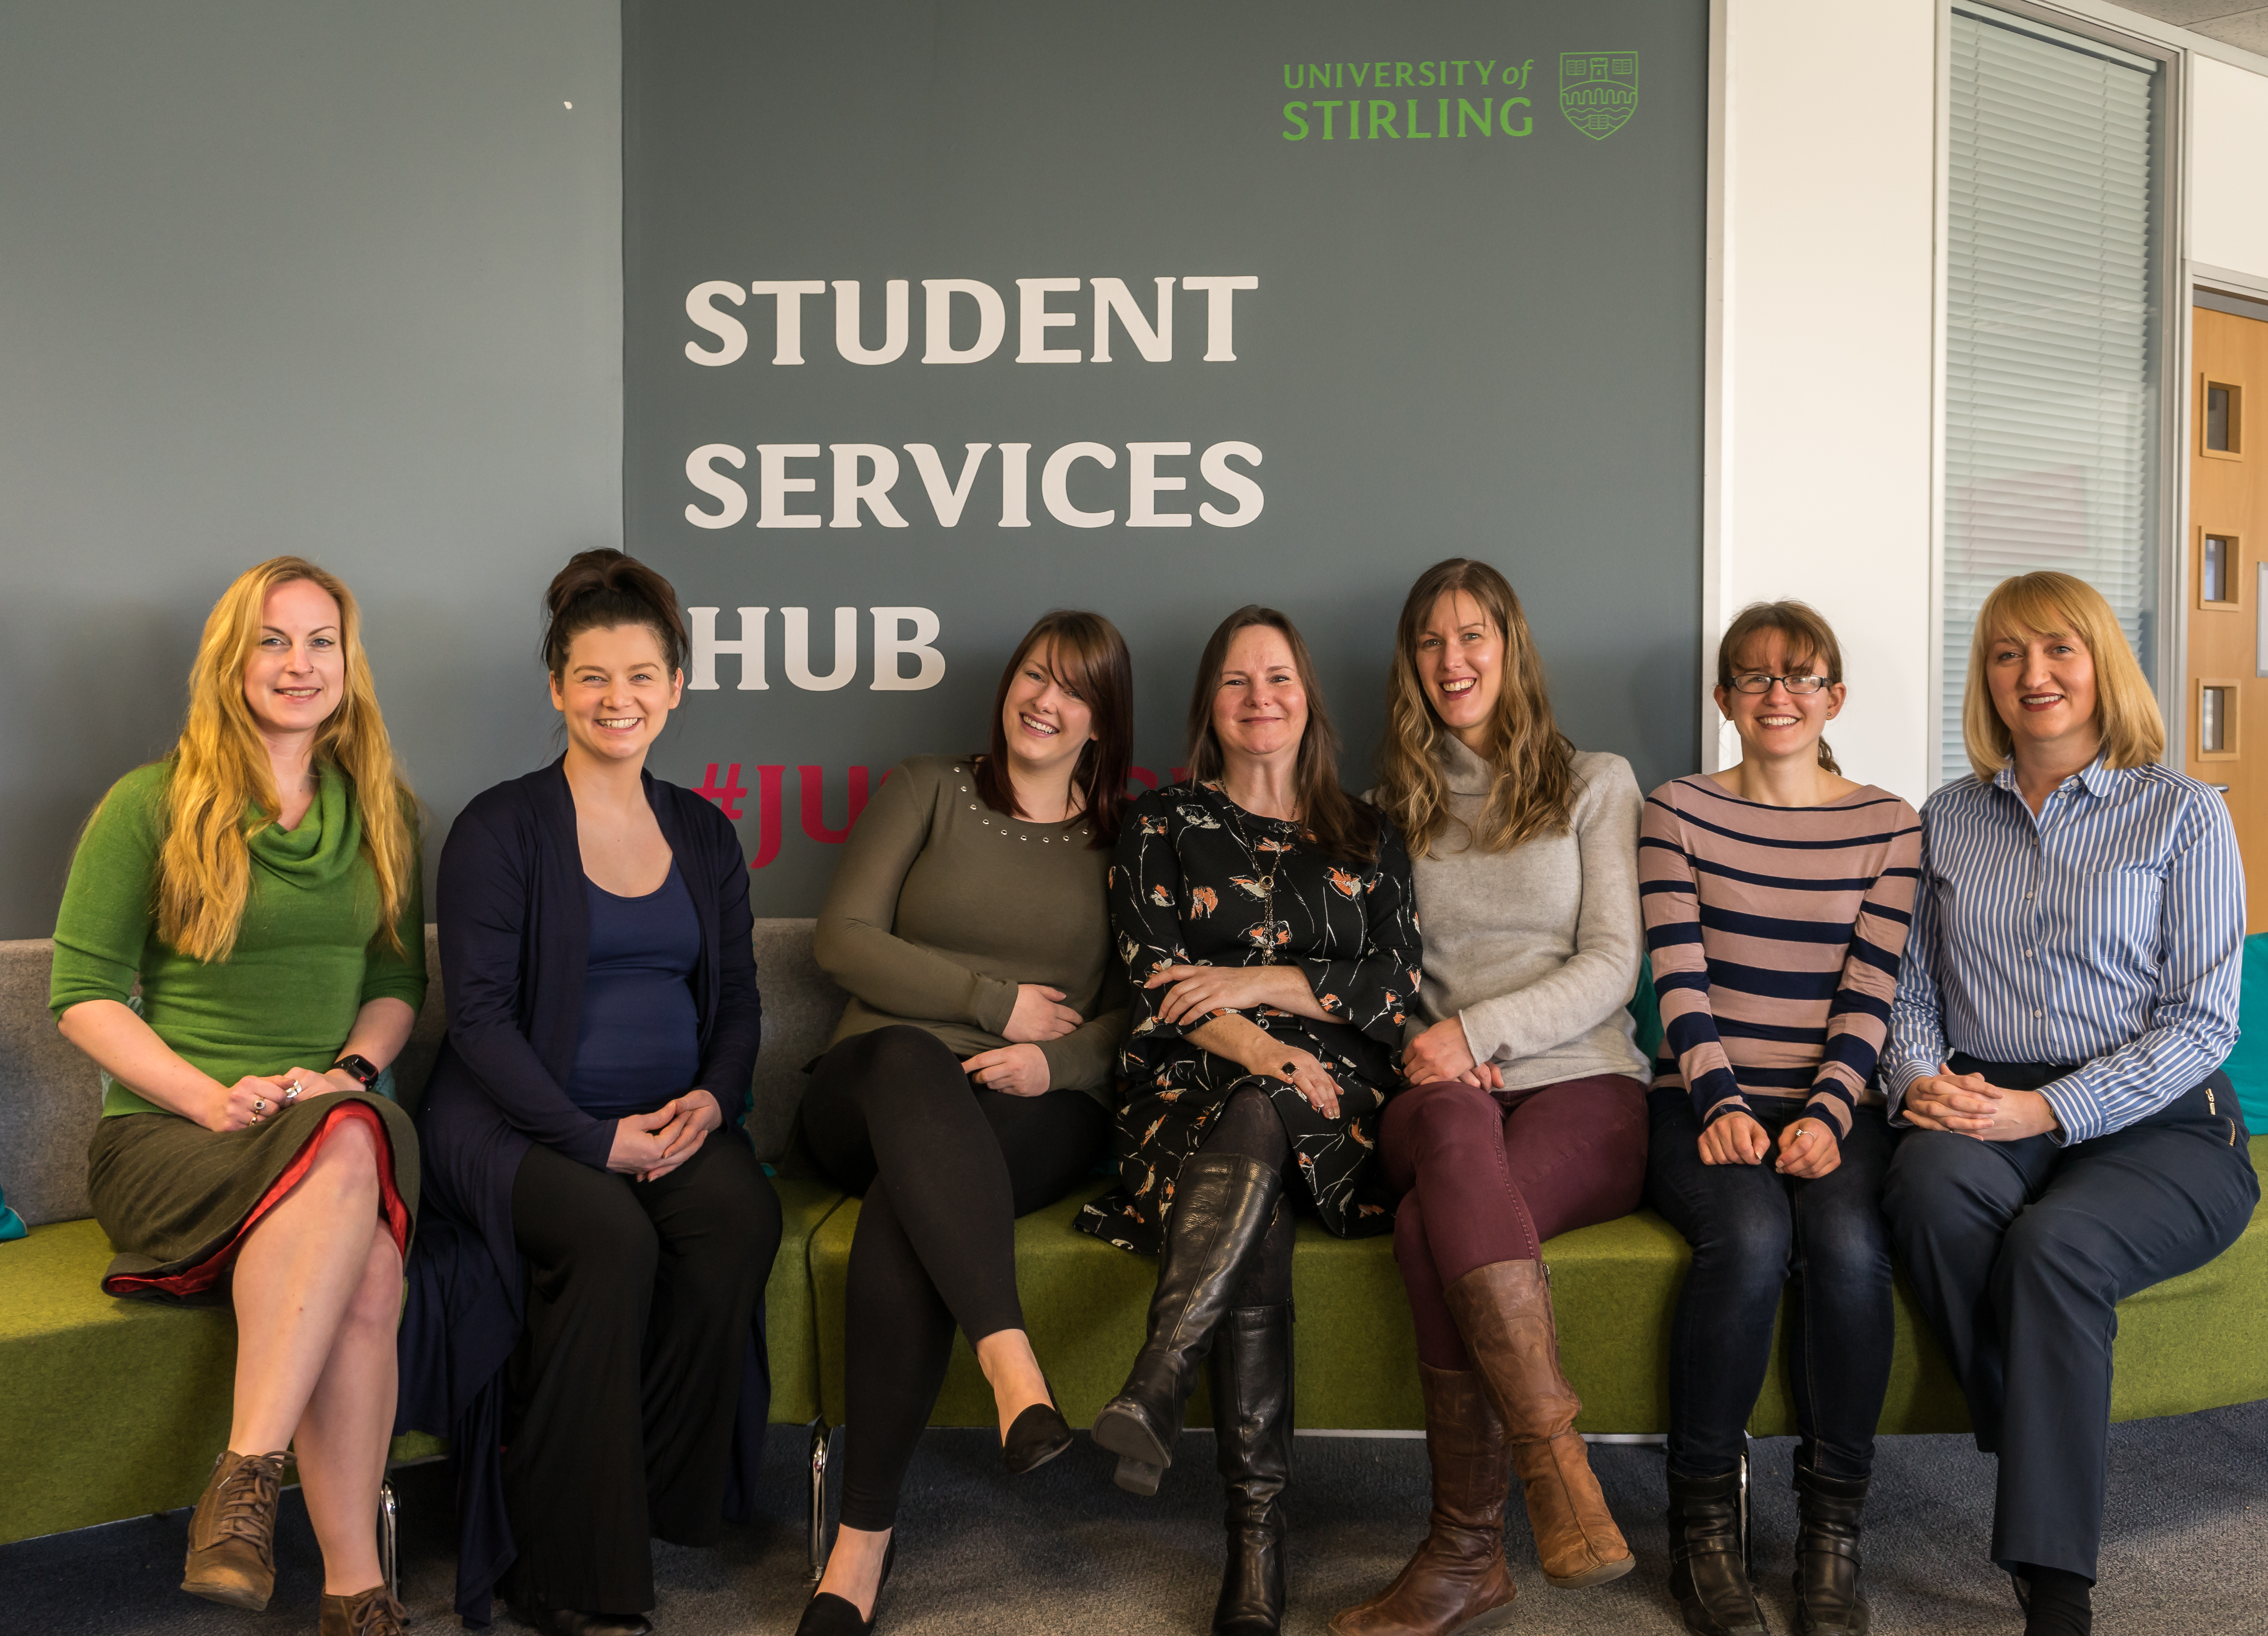 Group photo of the Student Hub team at the University of Stirling